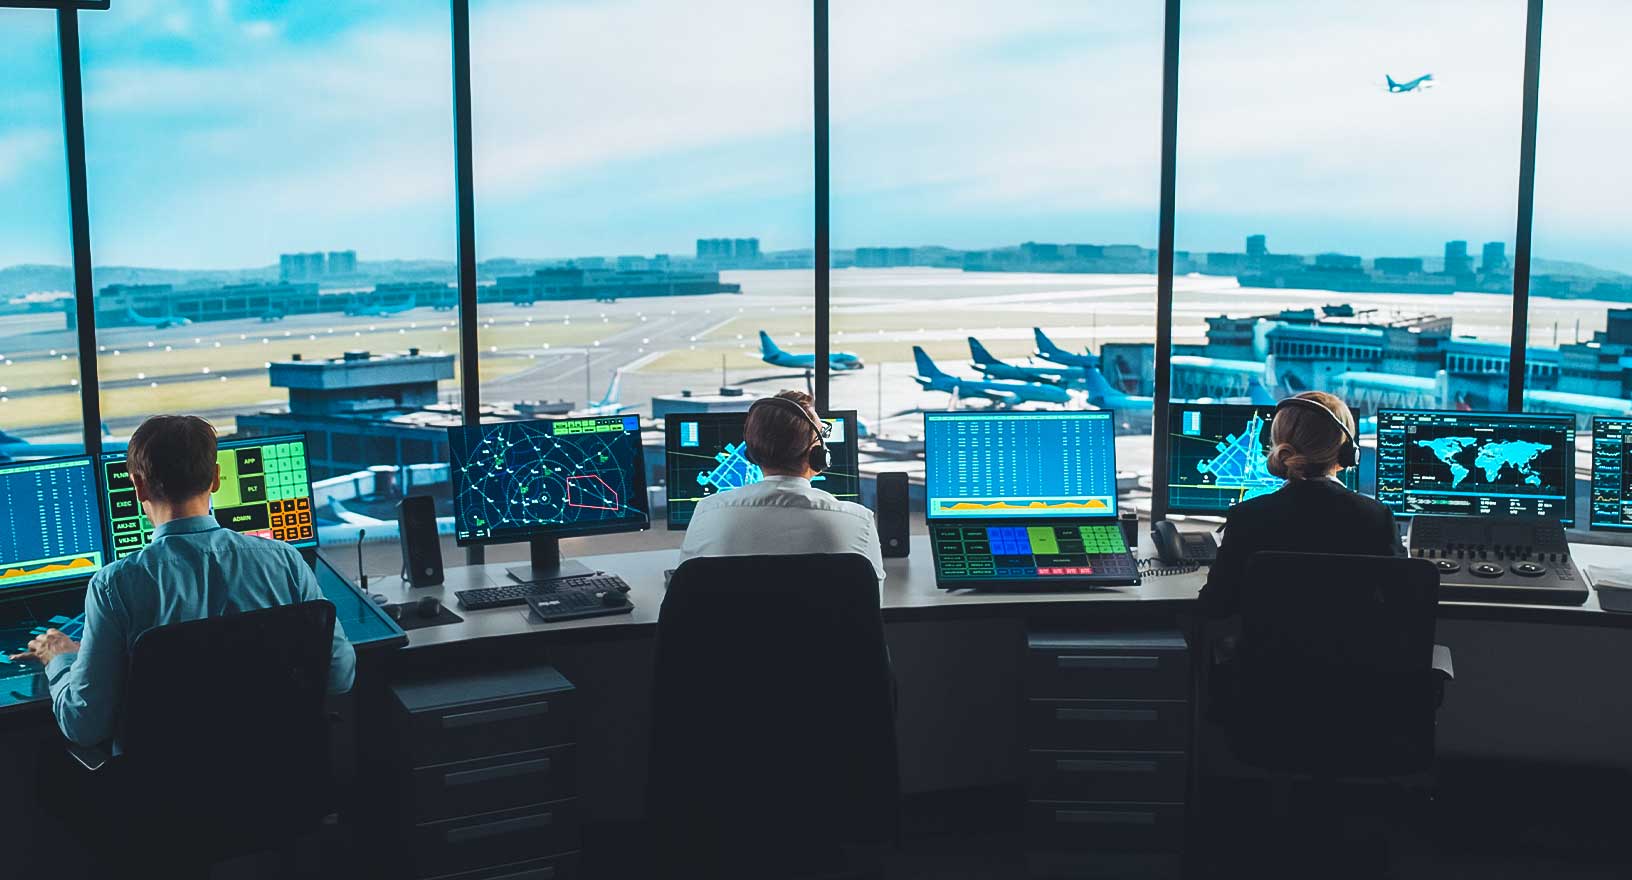 Air traffic control team working in a control tower